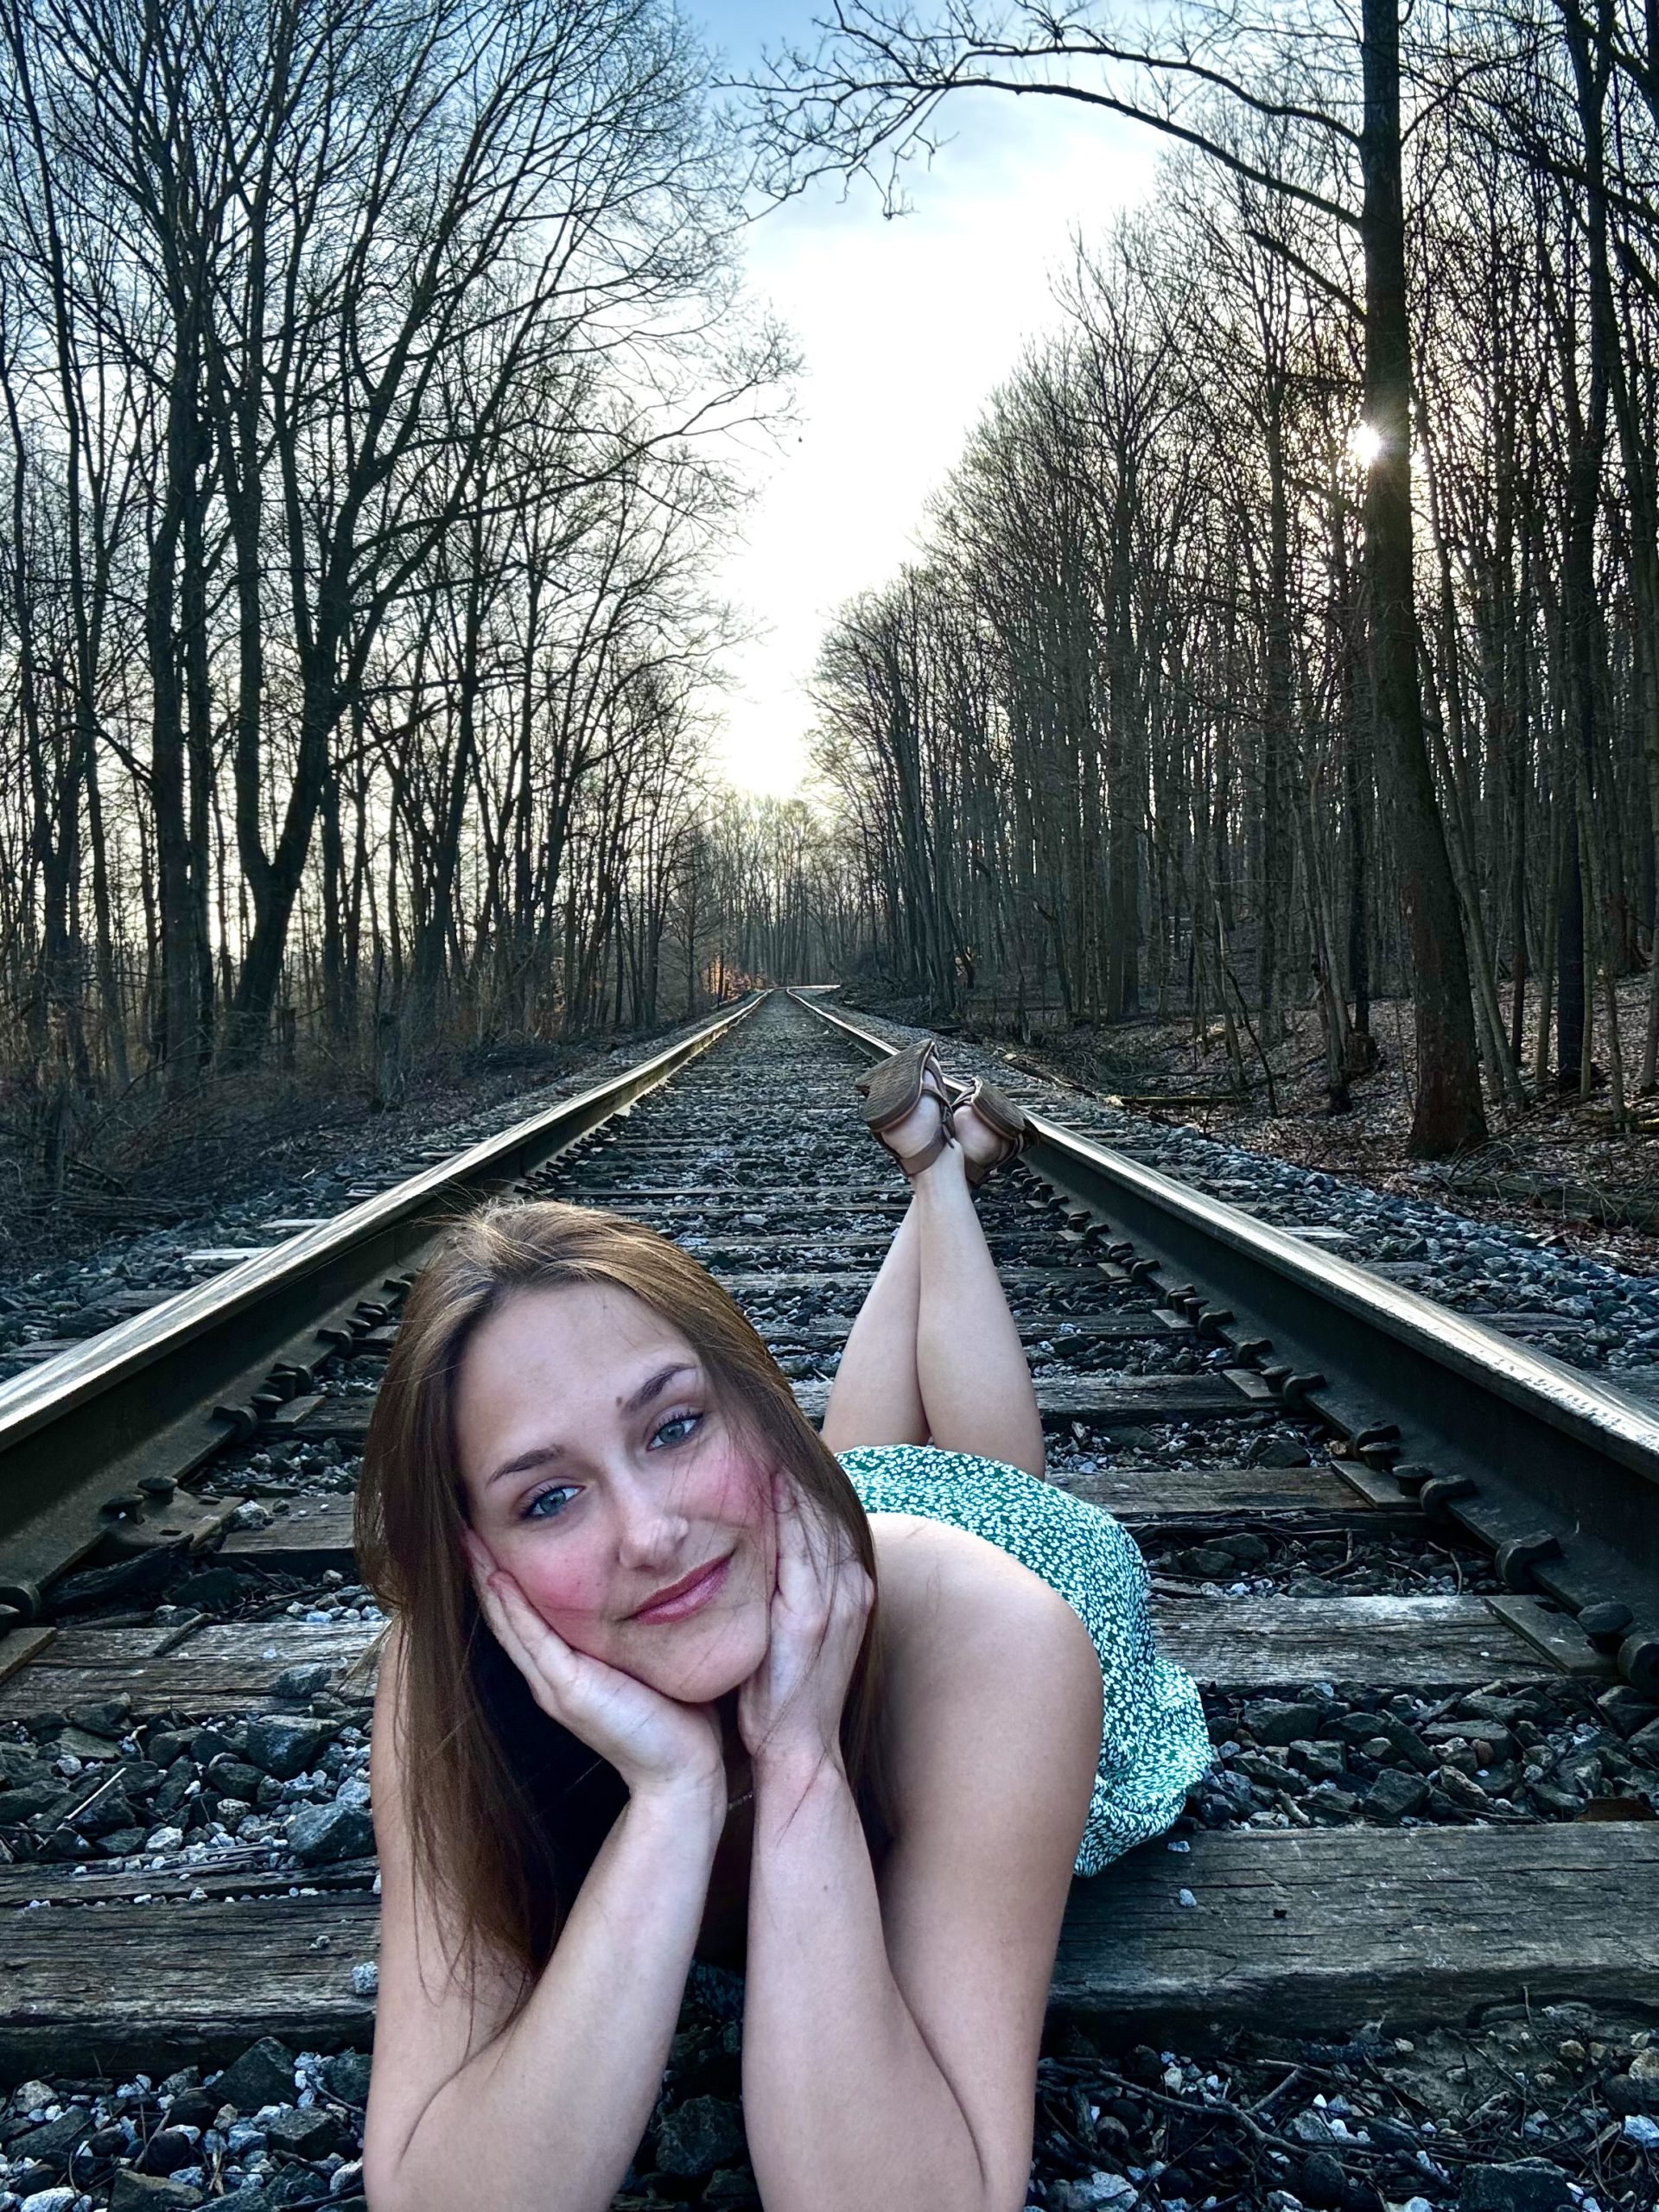 A young woman lies gracefully on the railroad tracks, exuding beauty and tranquility in her pose.